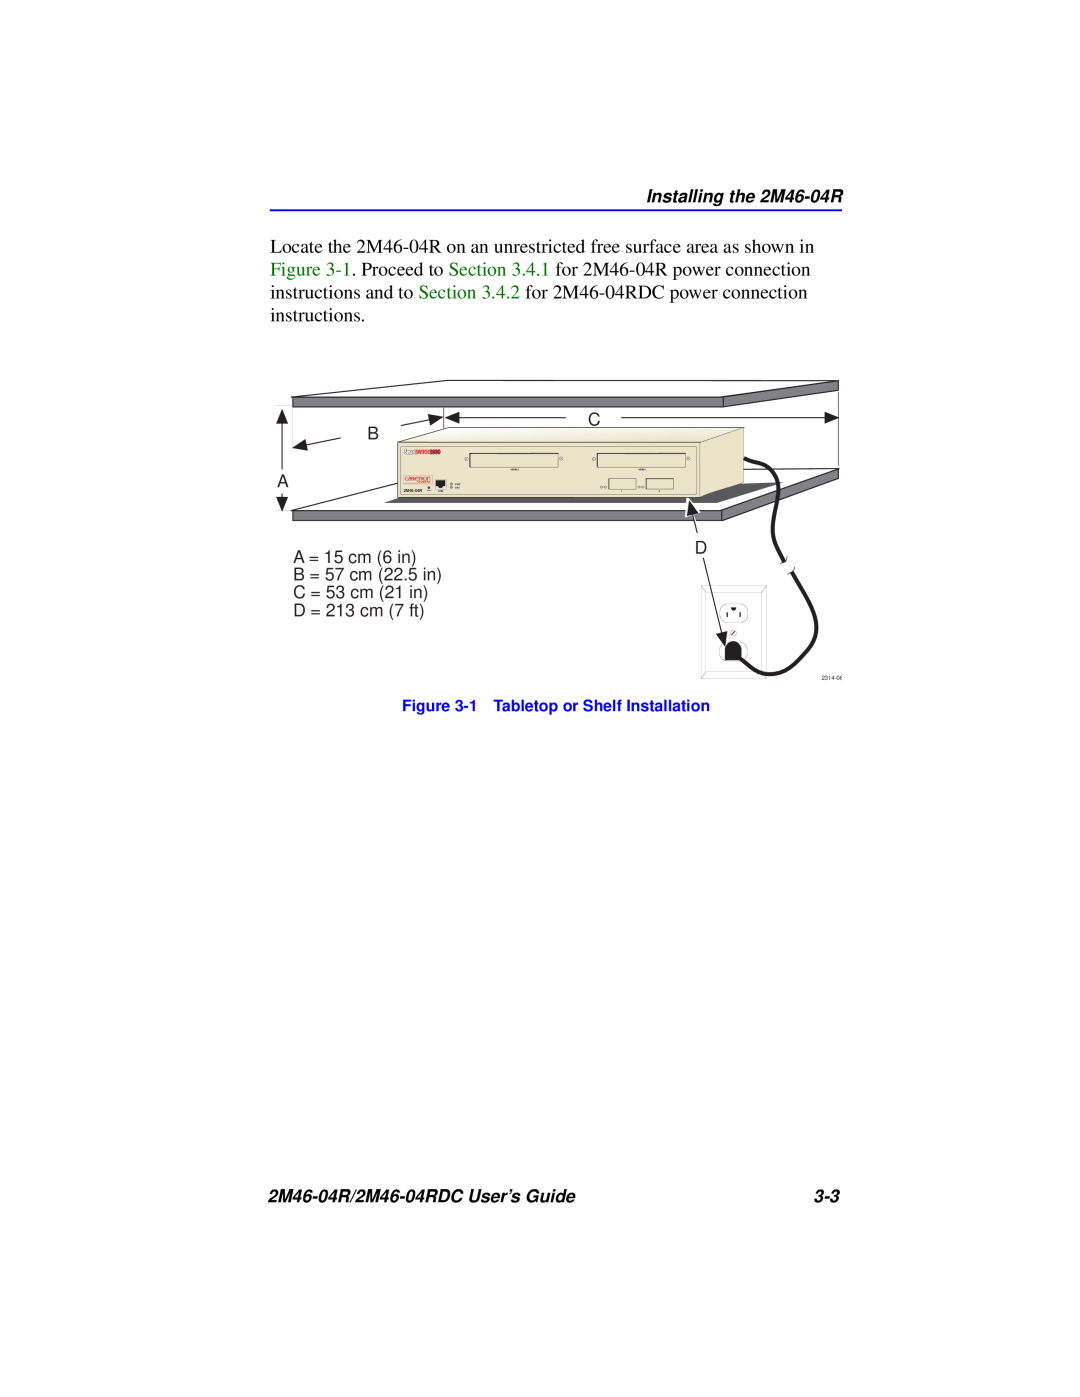 Cabletron Systems pmn manual A = 15 cm 6 in B = 57 cm 22.5 in C = 53 cm 21 in D = 213 cm 7 ft 